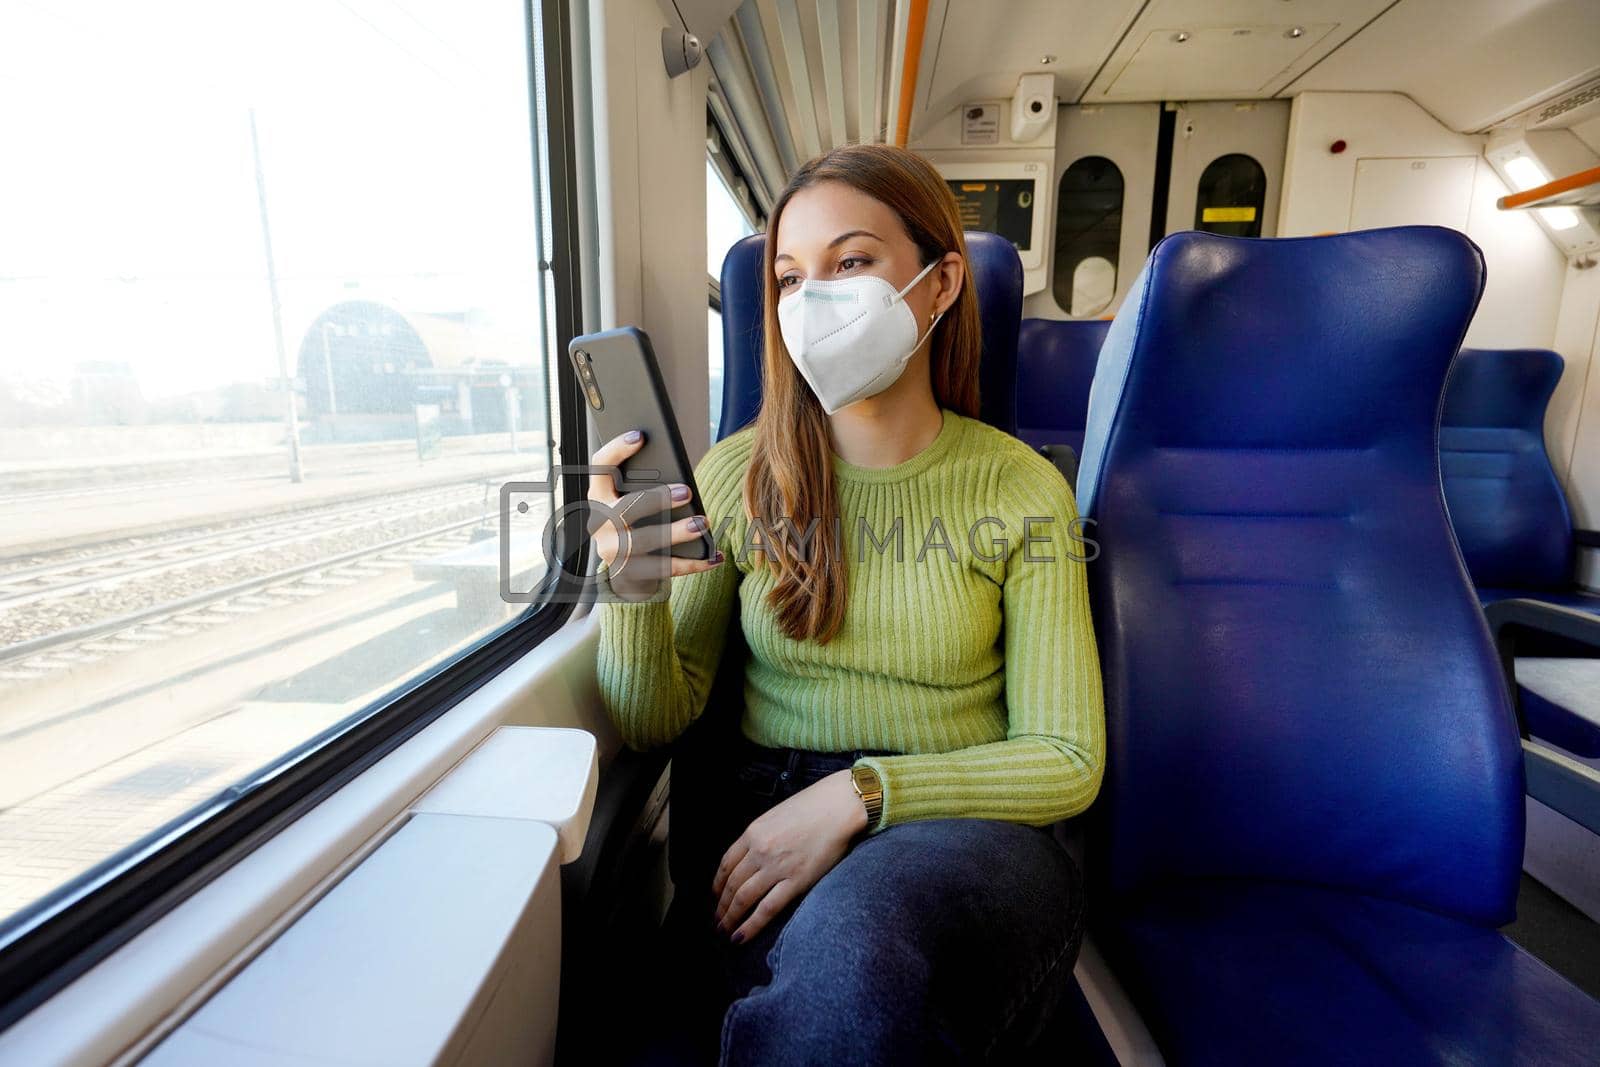 Young woman wearing medical mask relaxing in train seat while using smartphone app. Business woman enjoying view texting on mobile phone. Travel safety lifestyle.